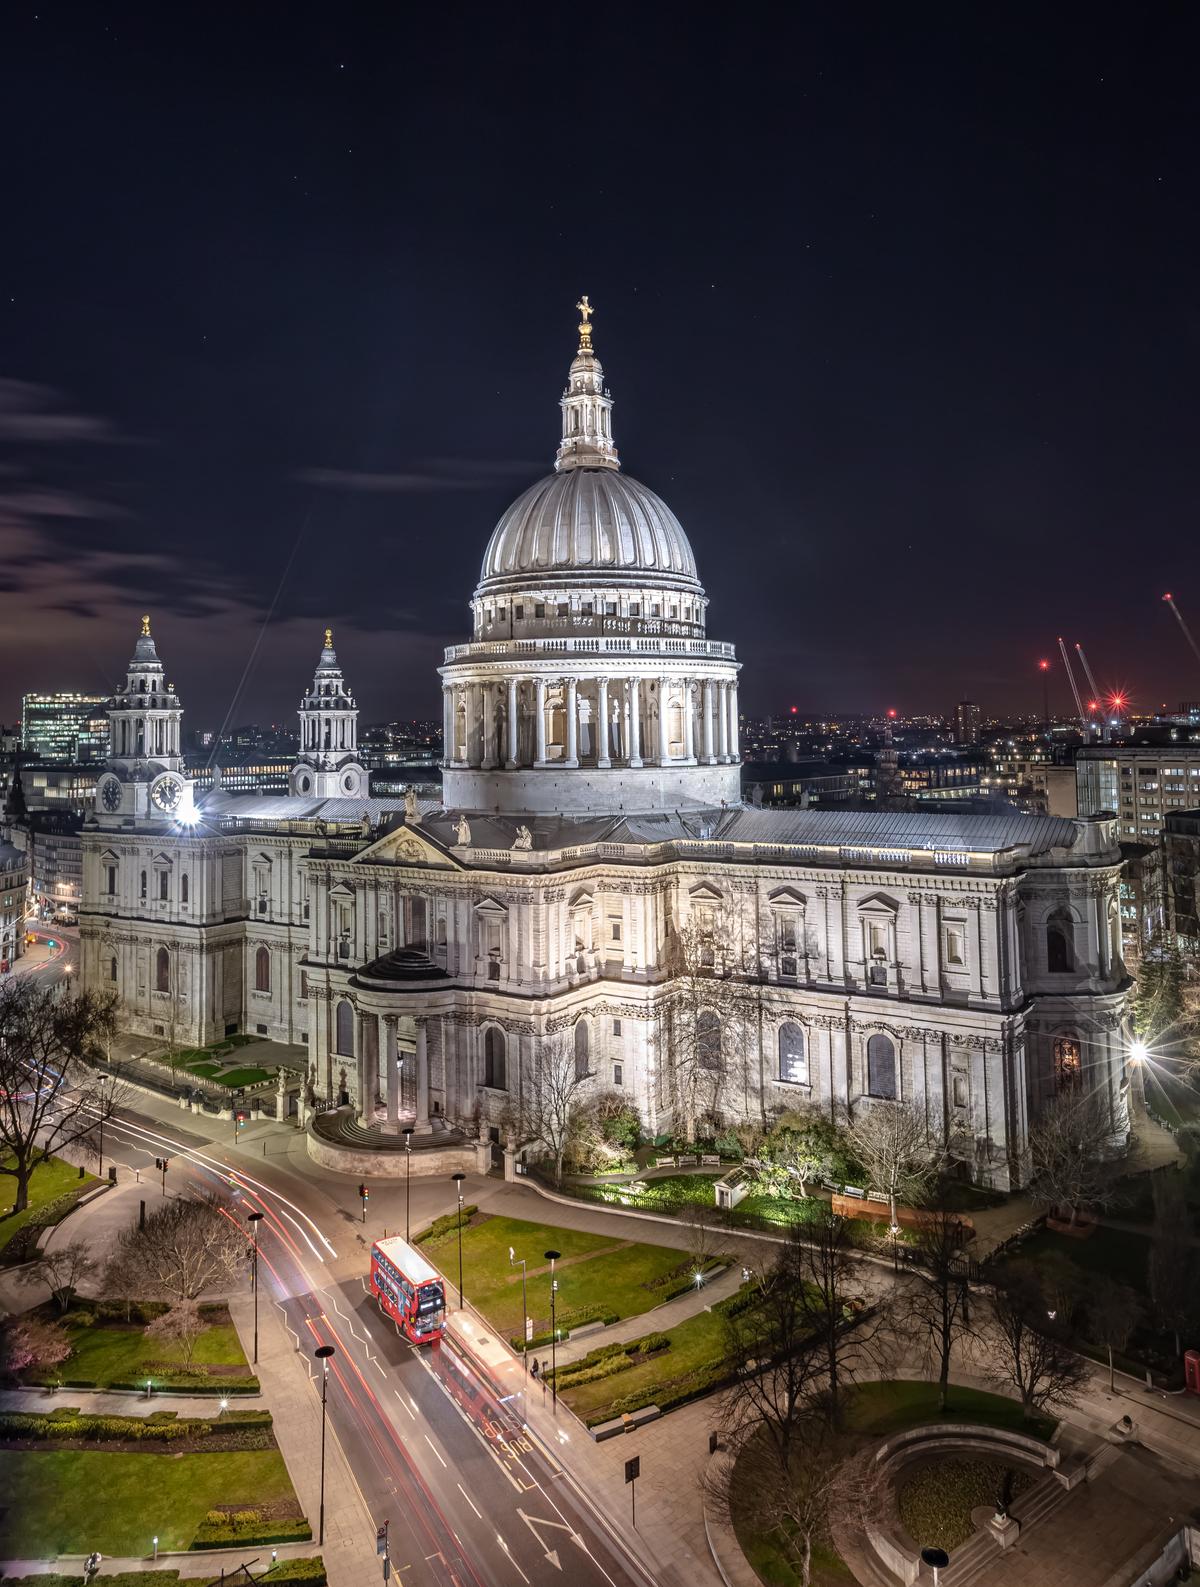 St. Paul's Cathedral was designed by Sir Christopher Wren in the English Baroque style in the late 17th century. (Alex Tai/Unsplash)